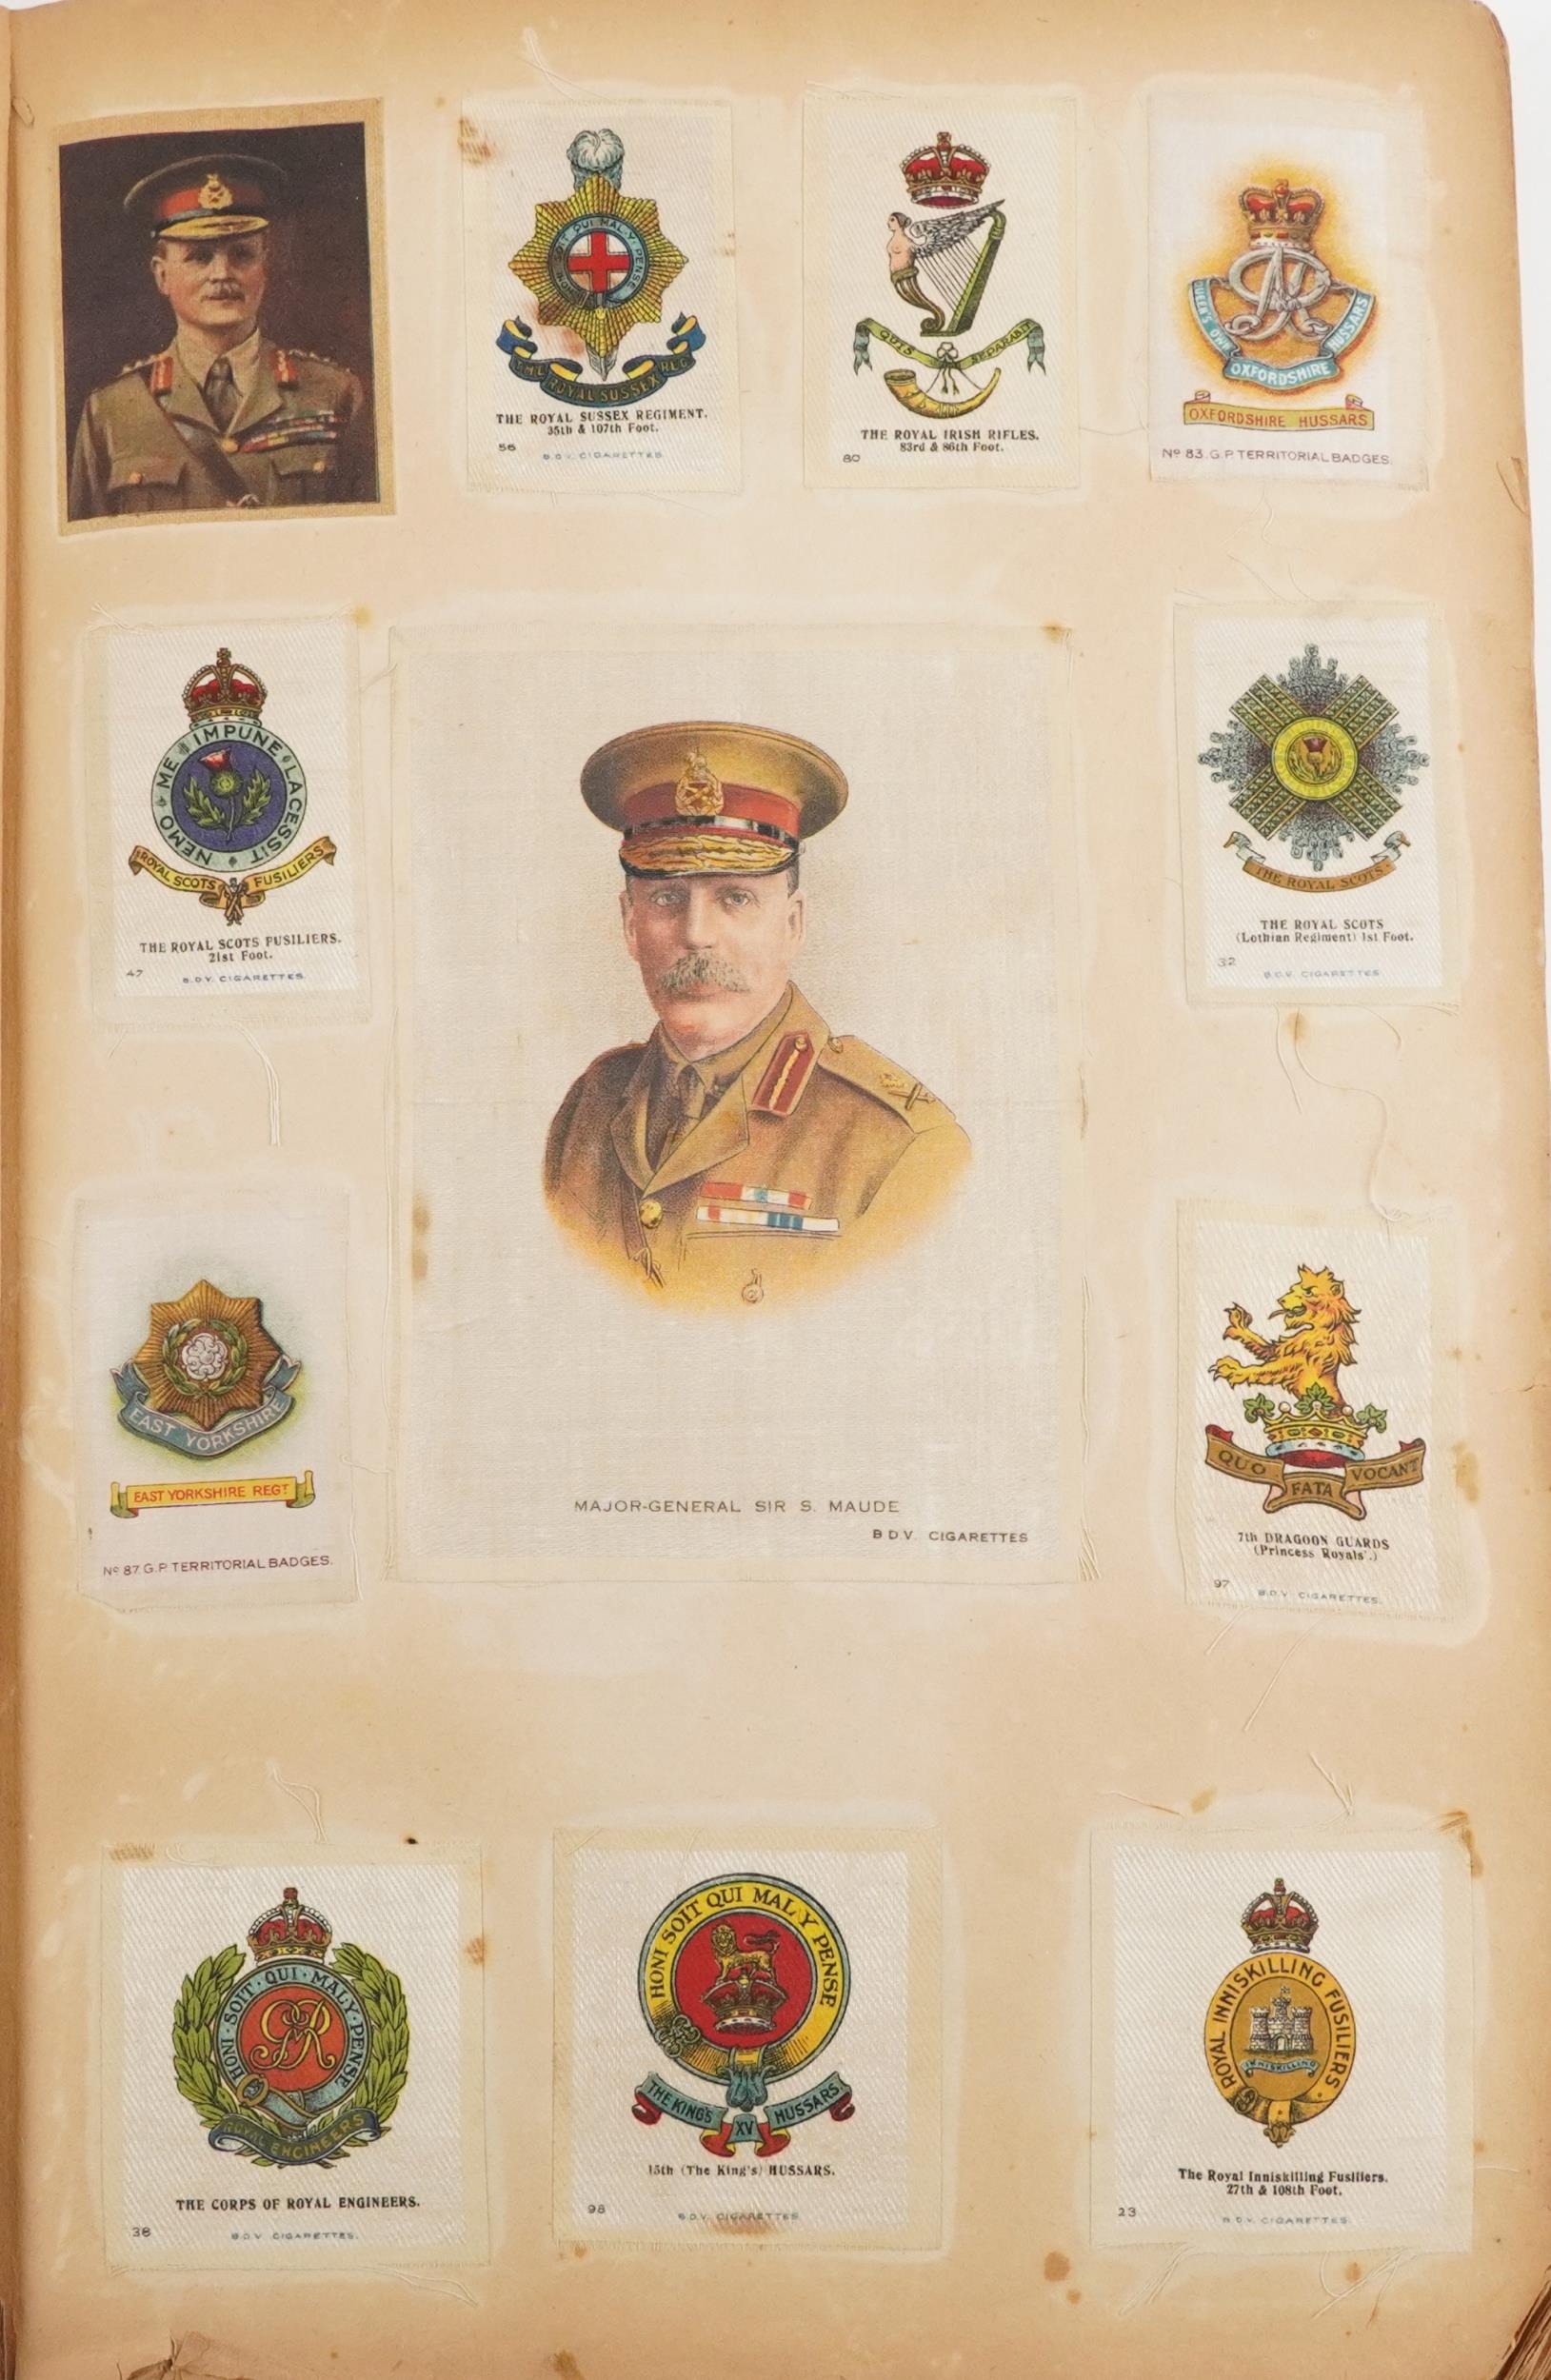 19th century and later ephemera including cigarette cards, tea cards, postcards and various books - Image 18 of 20